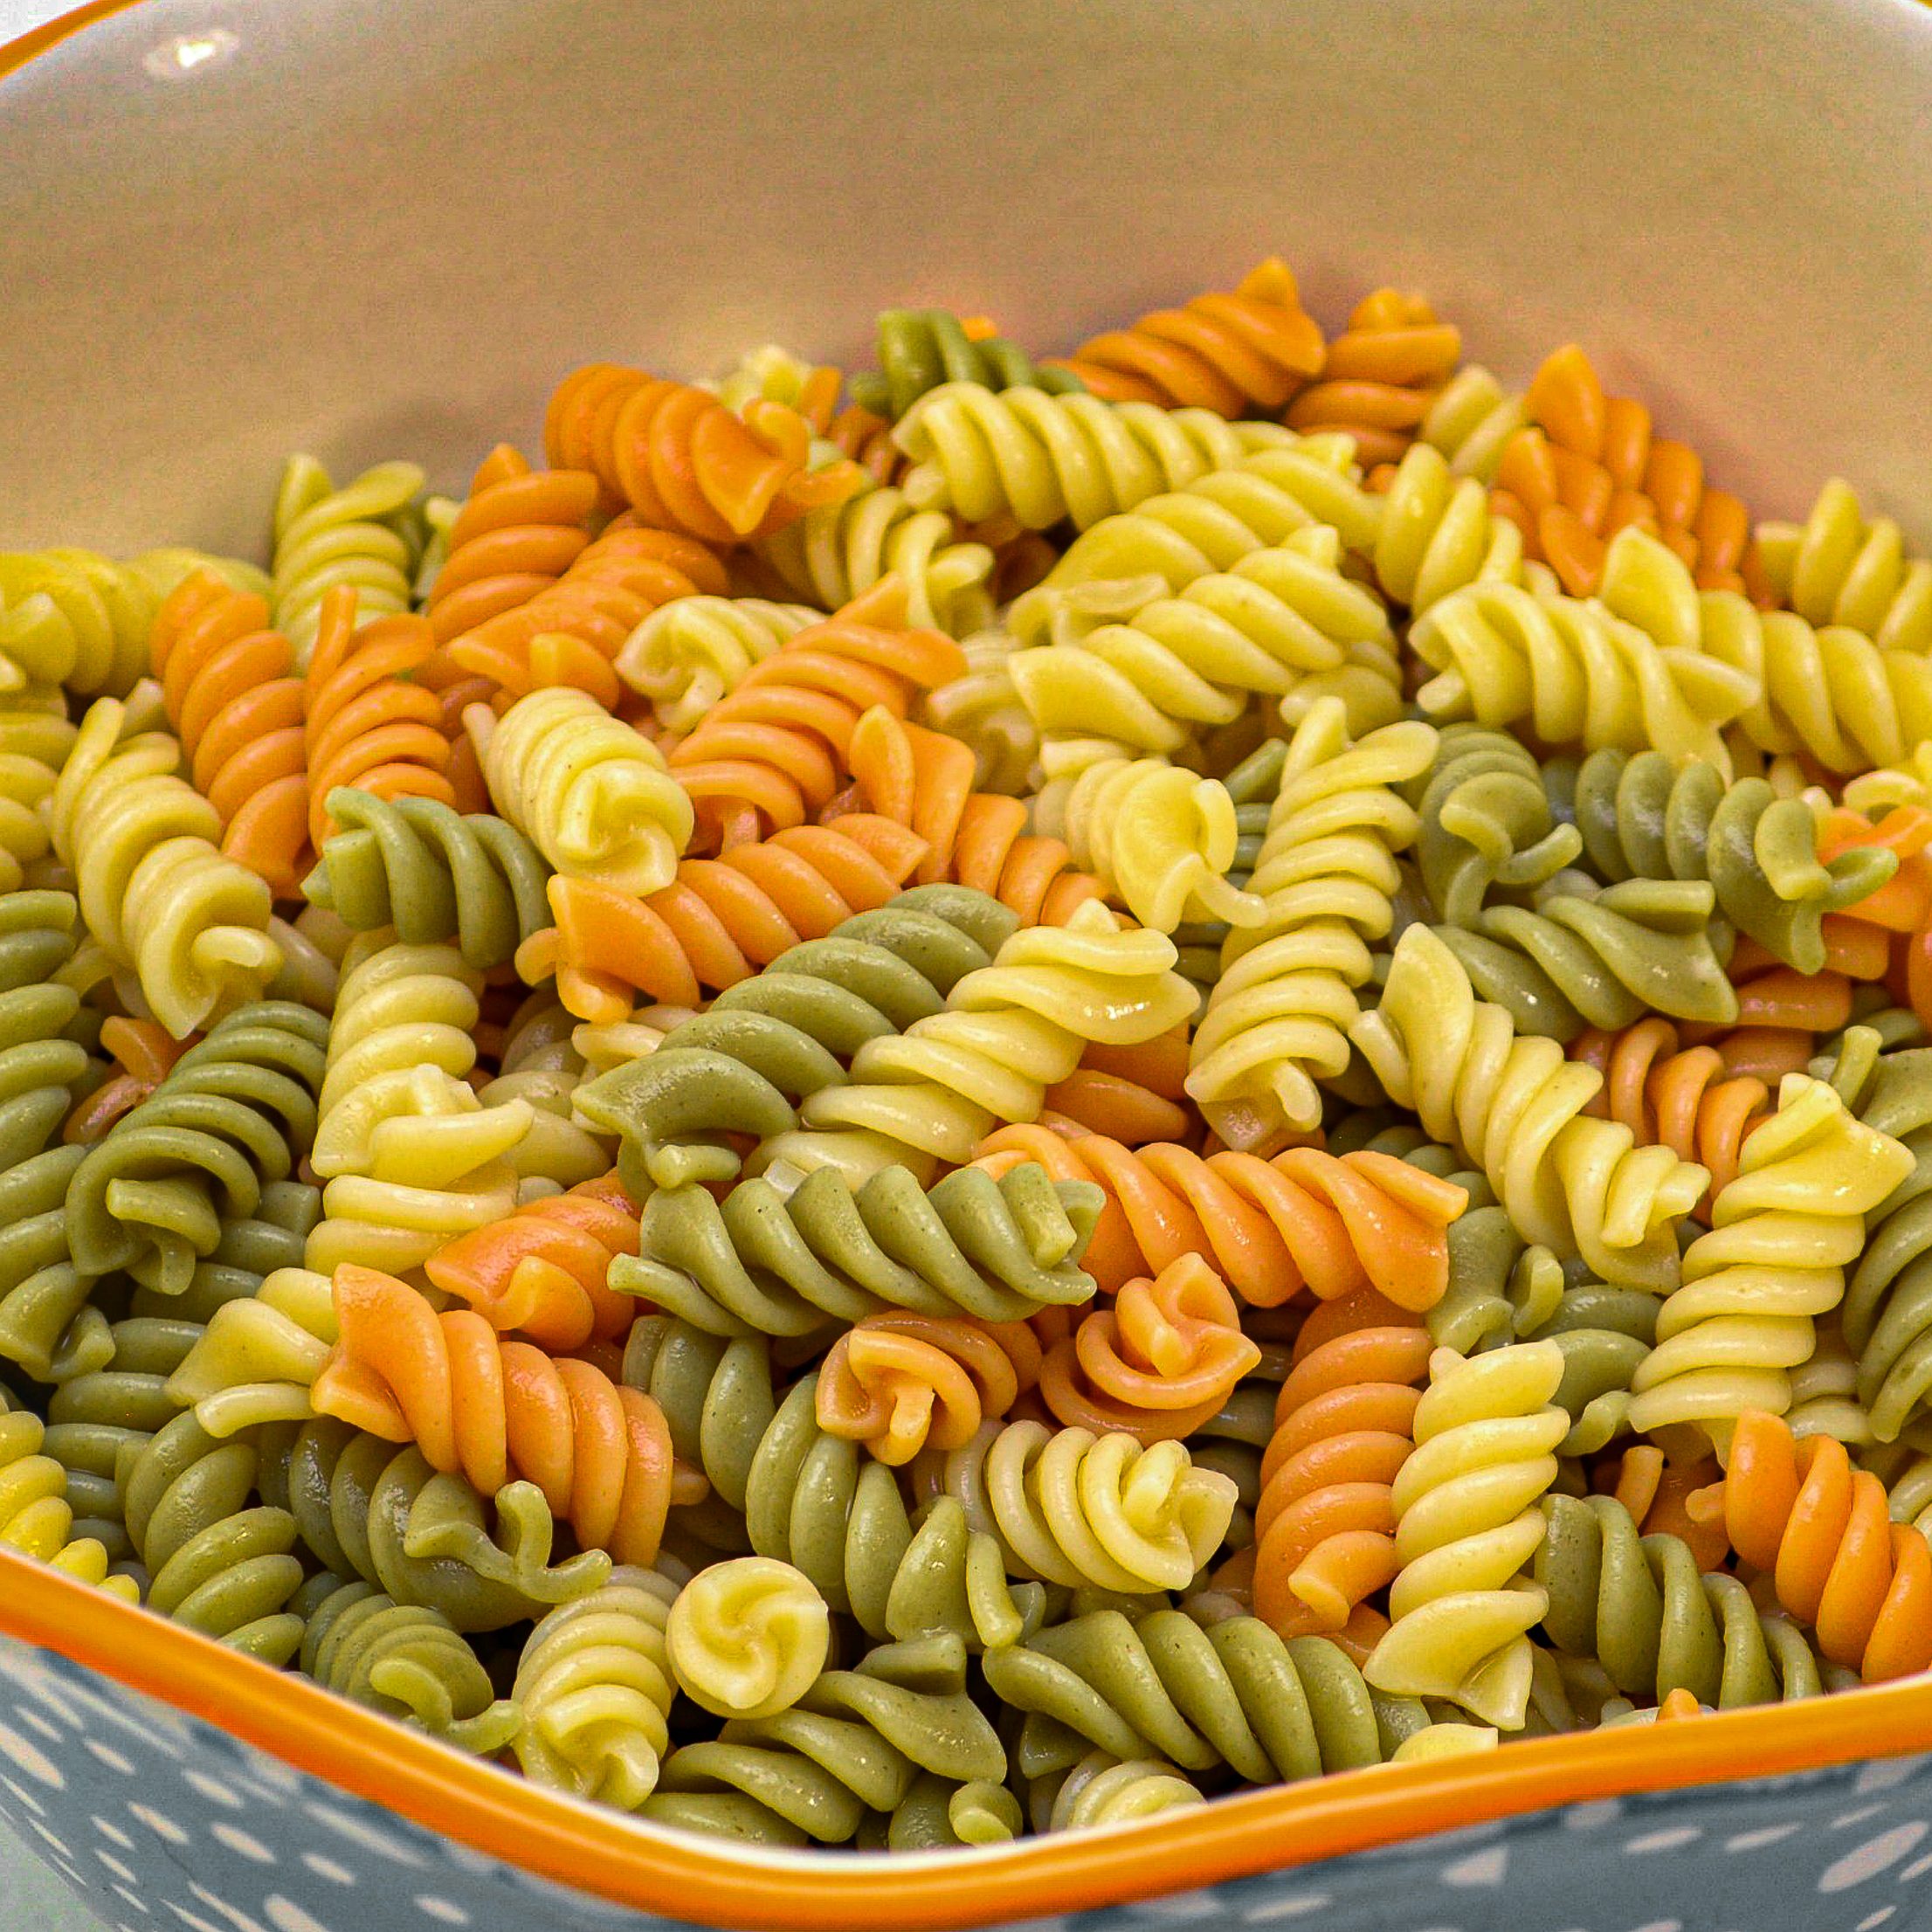 Cook the pasta as directed on the package. Once the pasta has finished cooking, strain it well and rinse it under cold water to cool it quickly. 